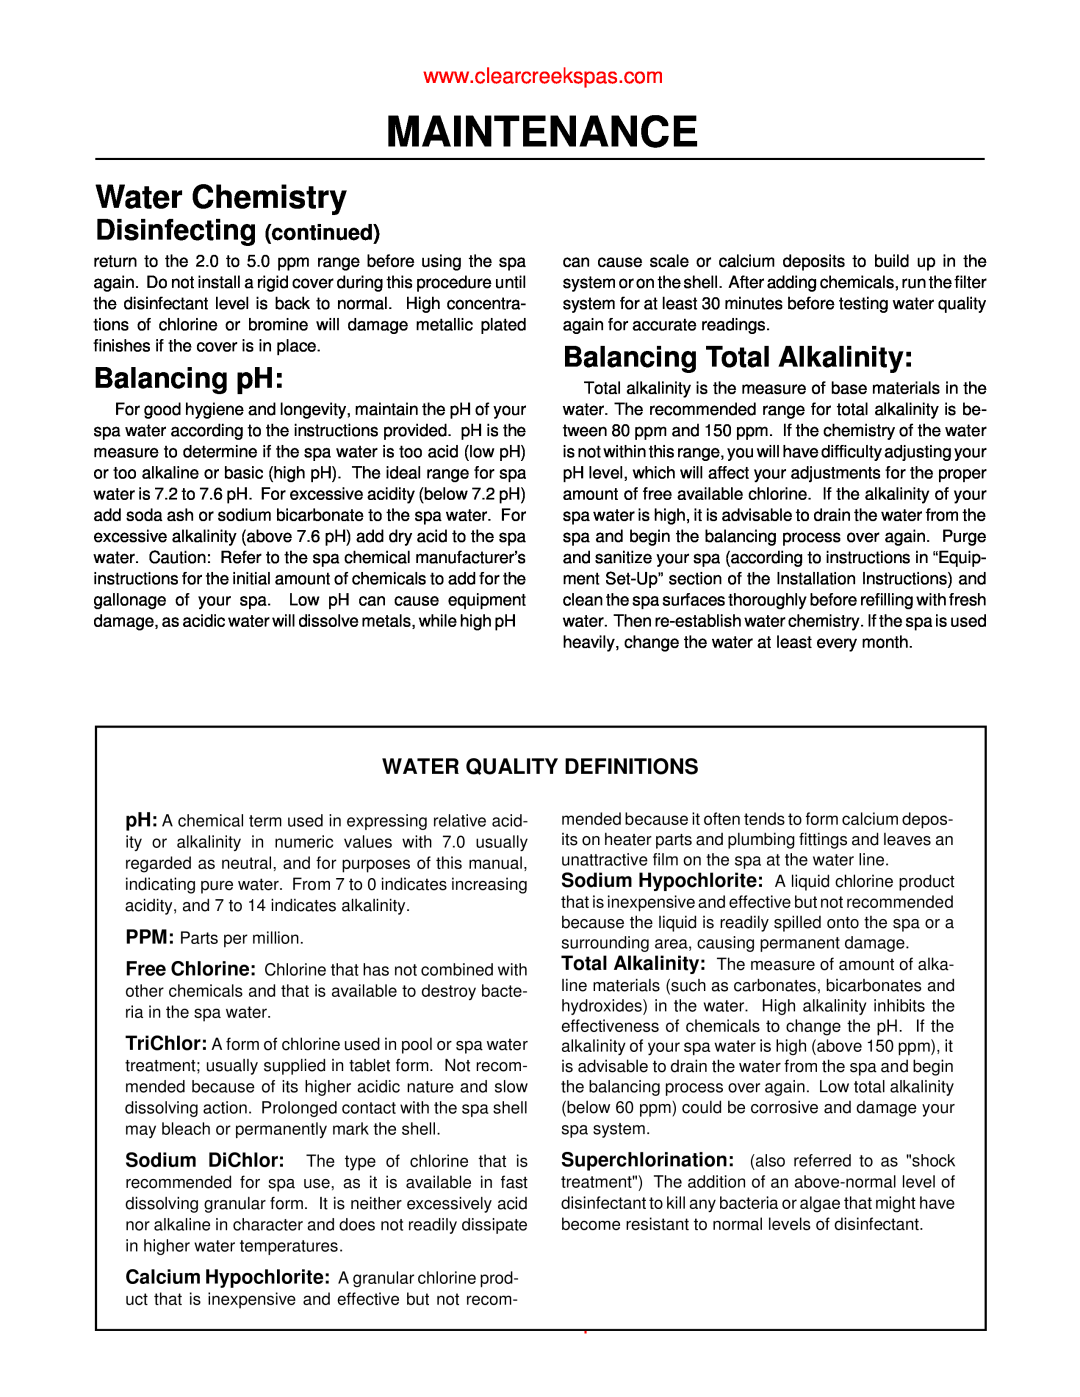 Whirlpool oortable spa Water Chemistry, Disinfecting continued, Balancing pH, Balancing Total Alkalinity, Maintenance 